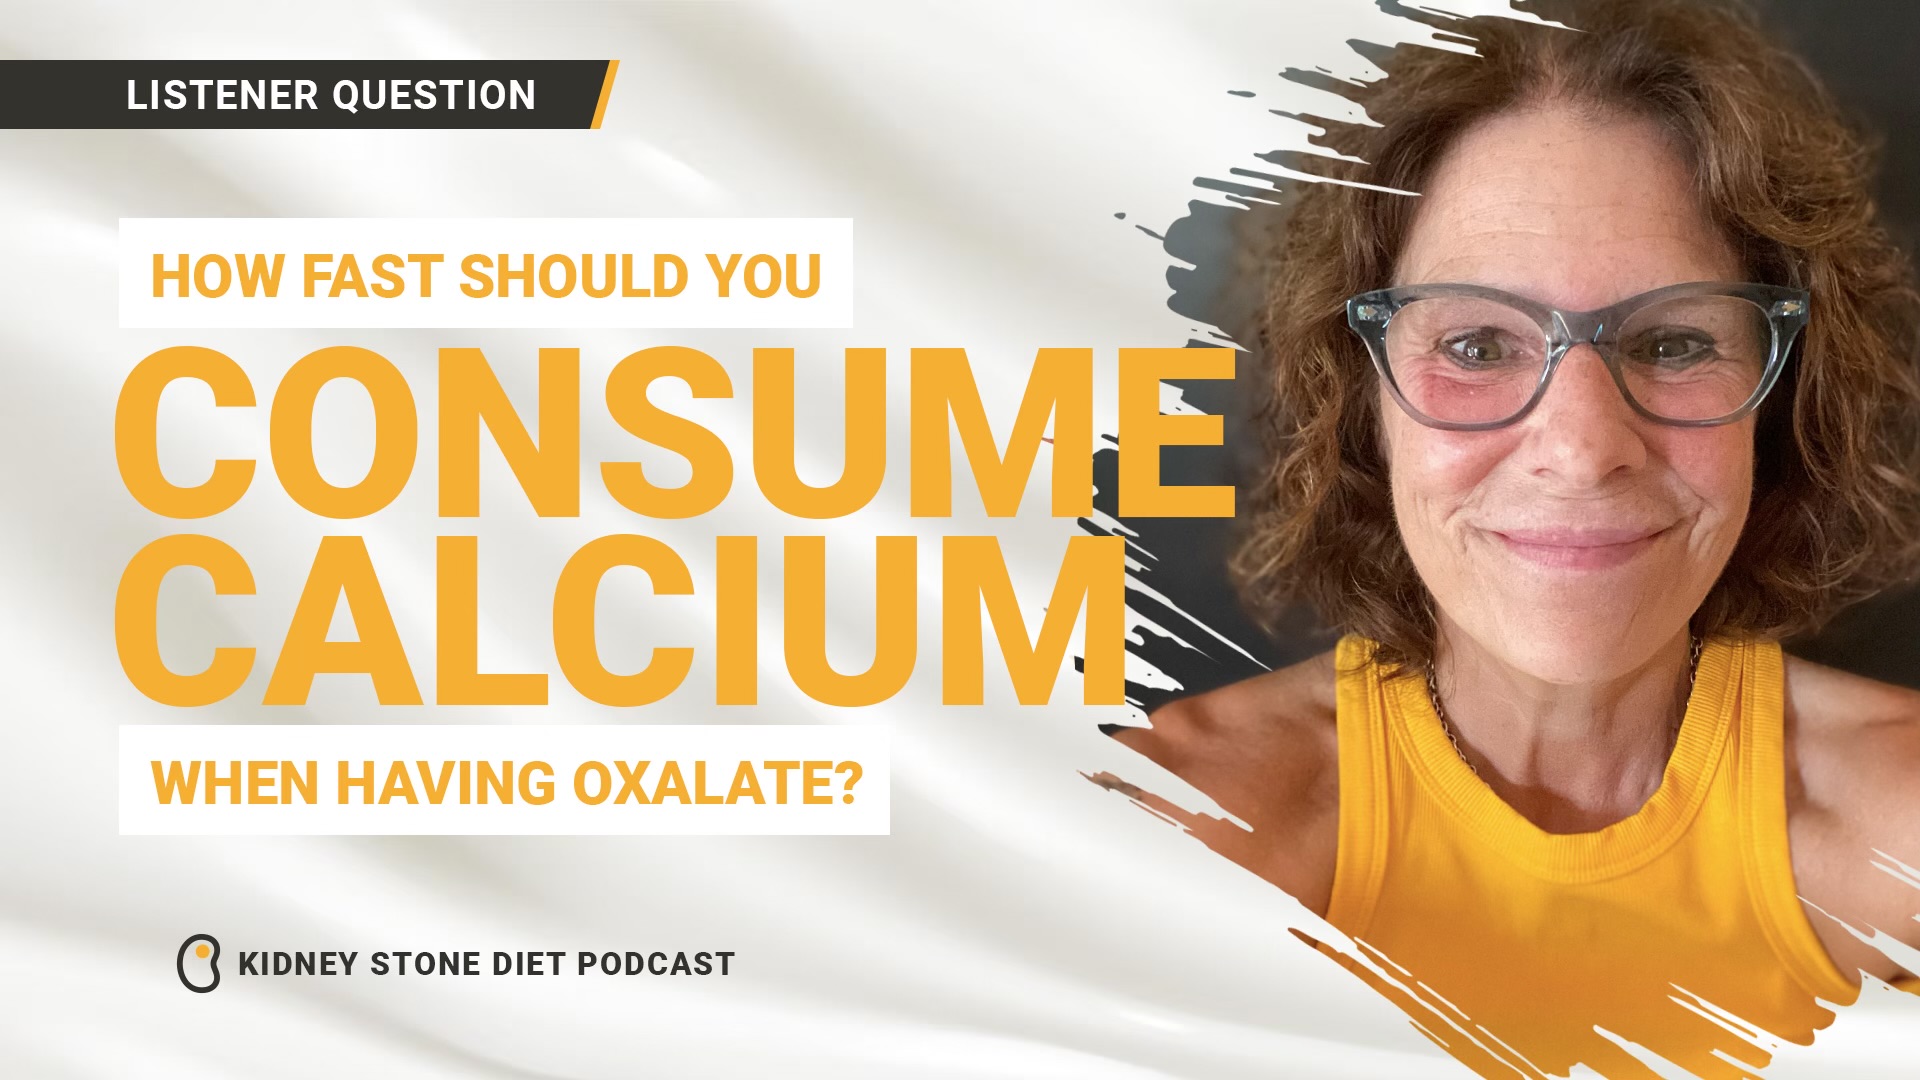 How soon should you have calcium after oxalate?